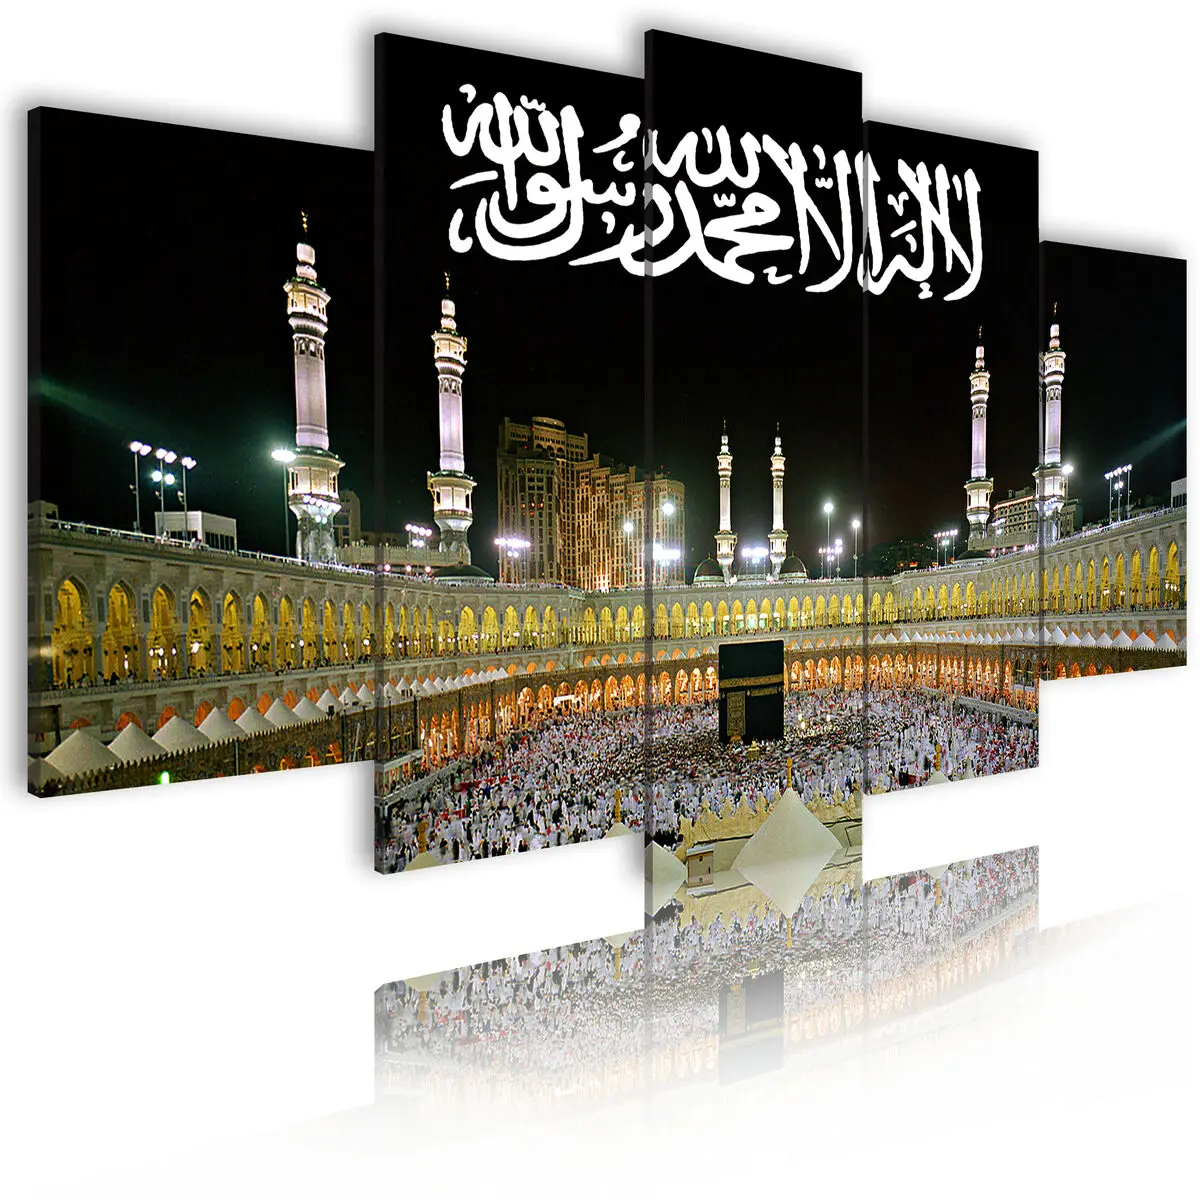 Mecca Live Wallpaper HD  Kaaba Free Wallpaper 3D Apk Download for Android  Latest version 13 commeecakabbalivewallpaperfreeapp